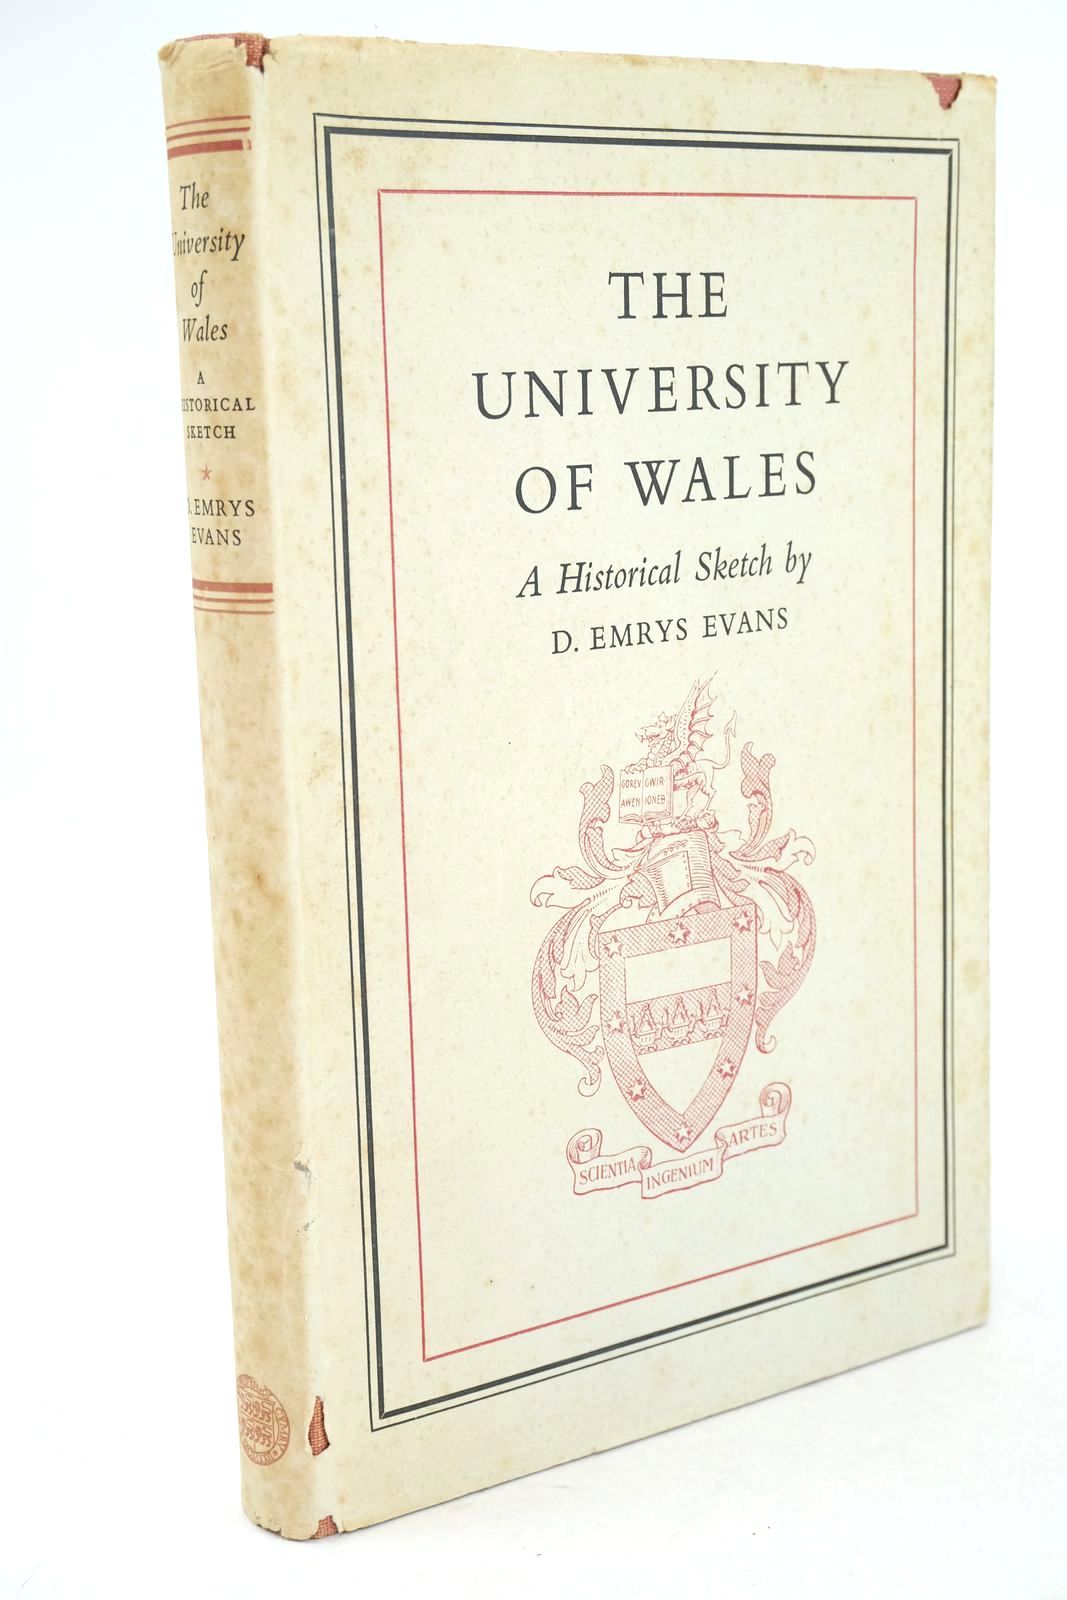 Photo of THE UNIVERSITY OF WALES written by Evans, D. Emrys published by University of Wales (STOCK CODE: 1325627)  for sale by Stella & Rose's Books